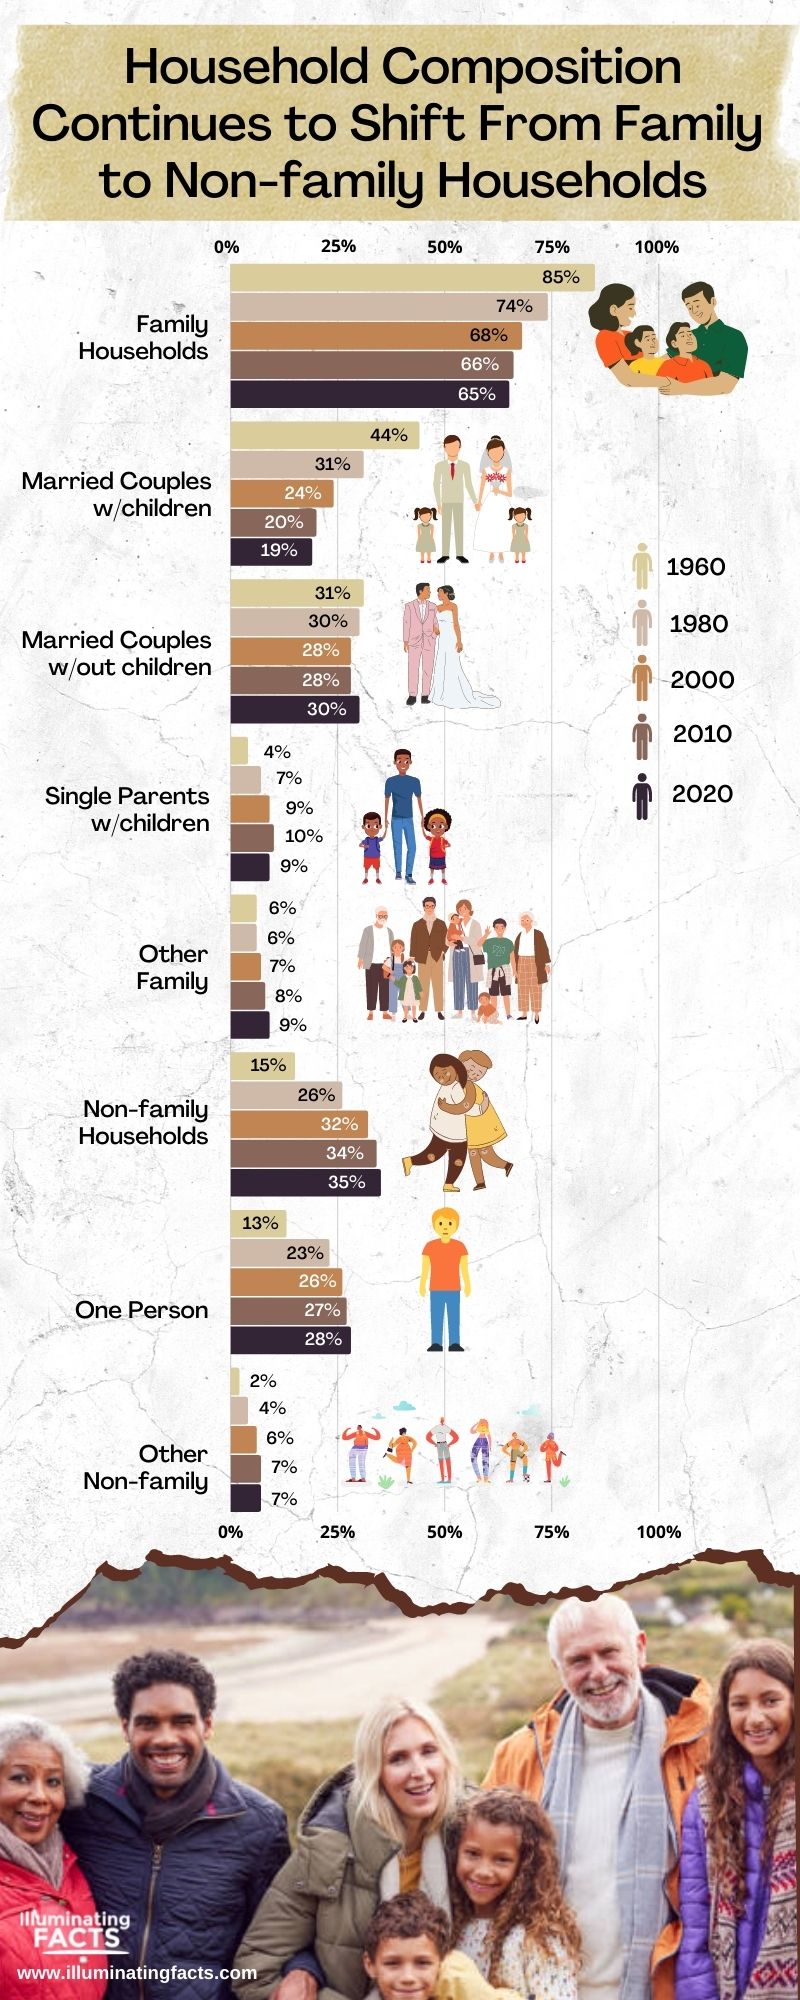 Household Composition Continues to Shift From Family to Non-family Households